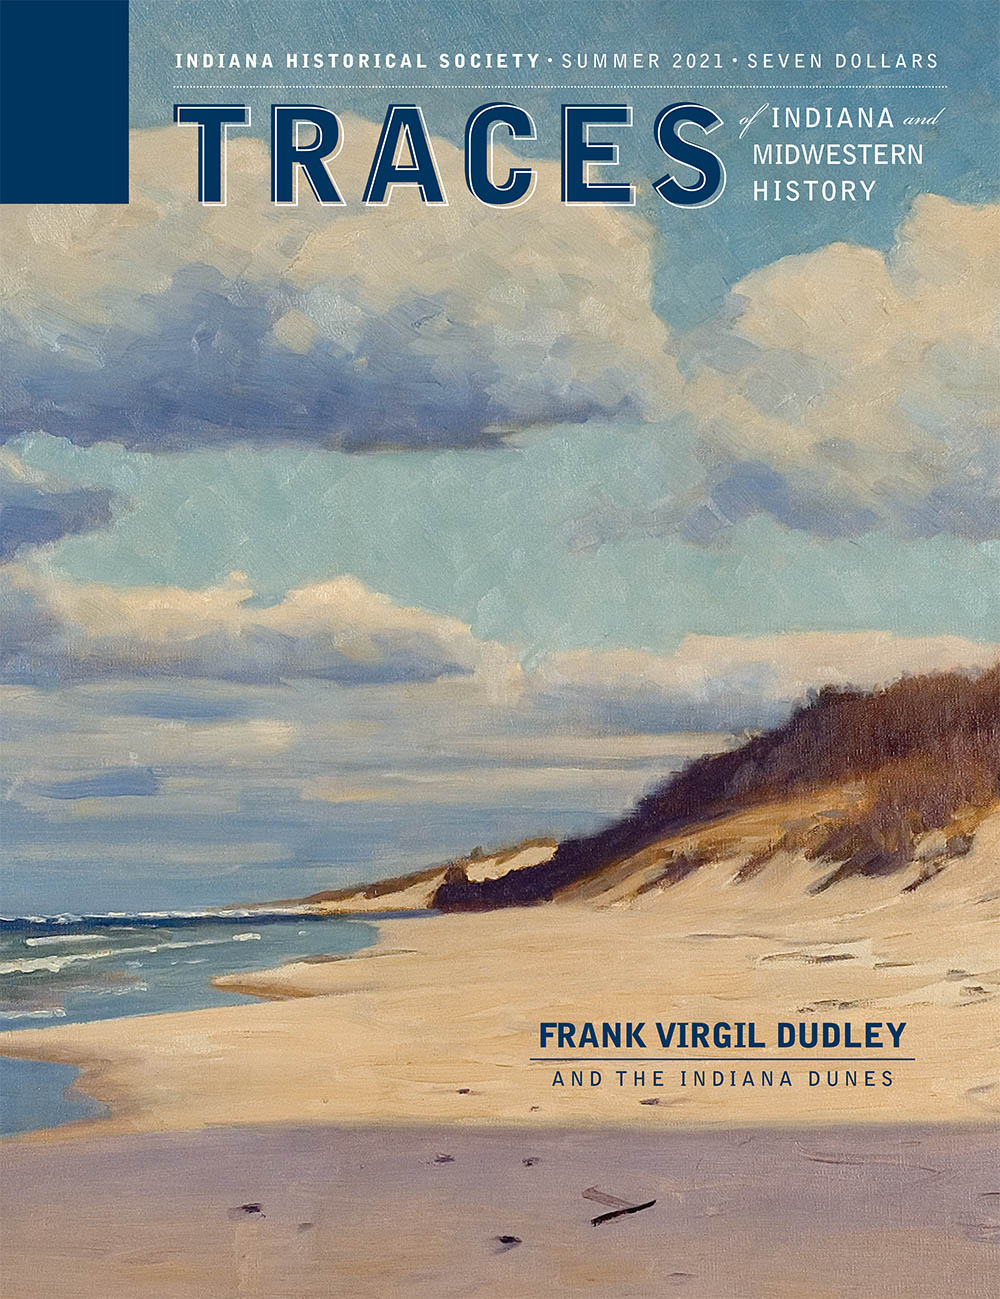 Traces of Indiana and Midwestern History, Summer 2021, Volume 33, Number 3